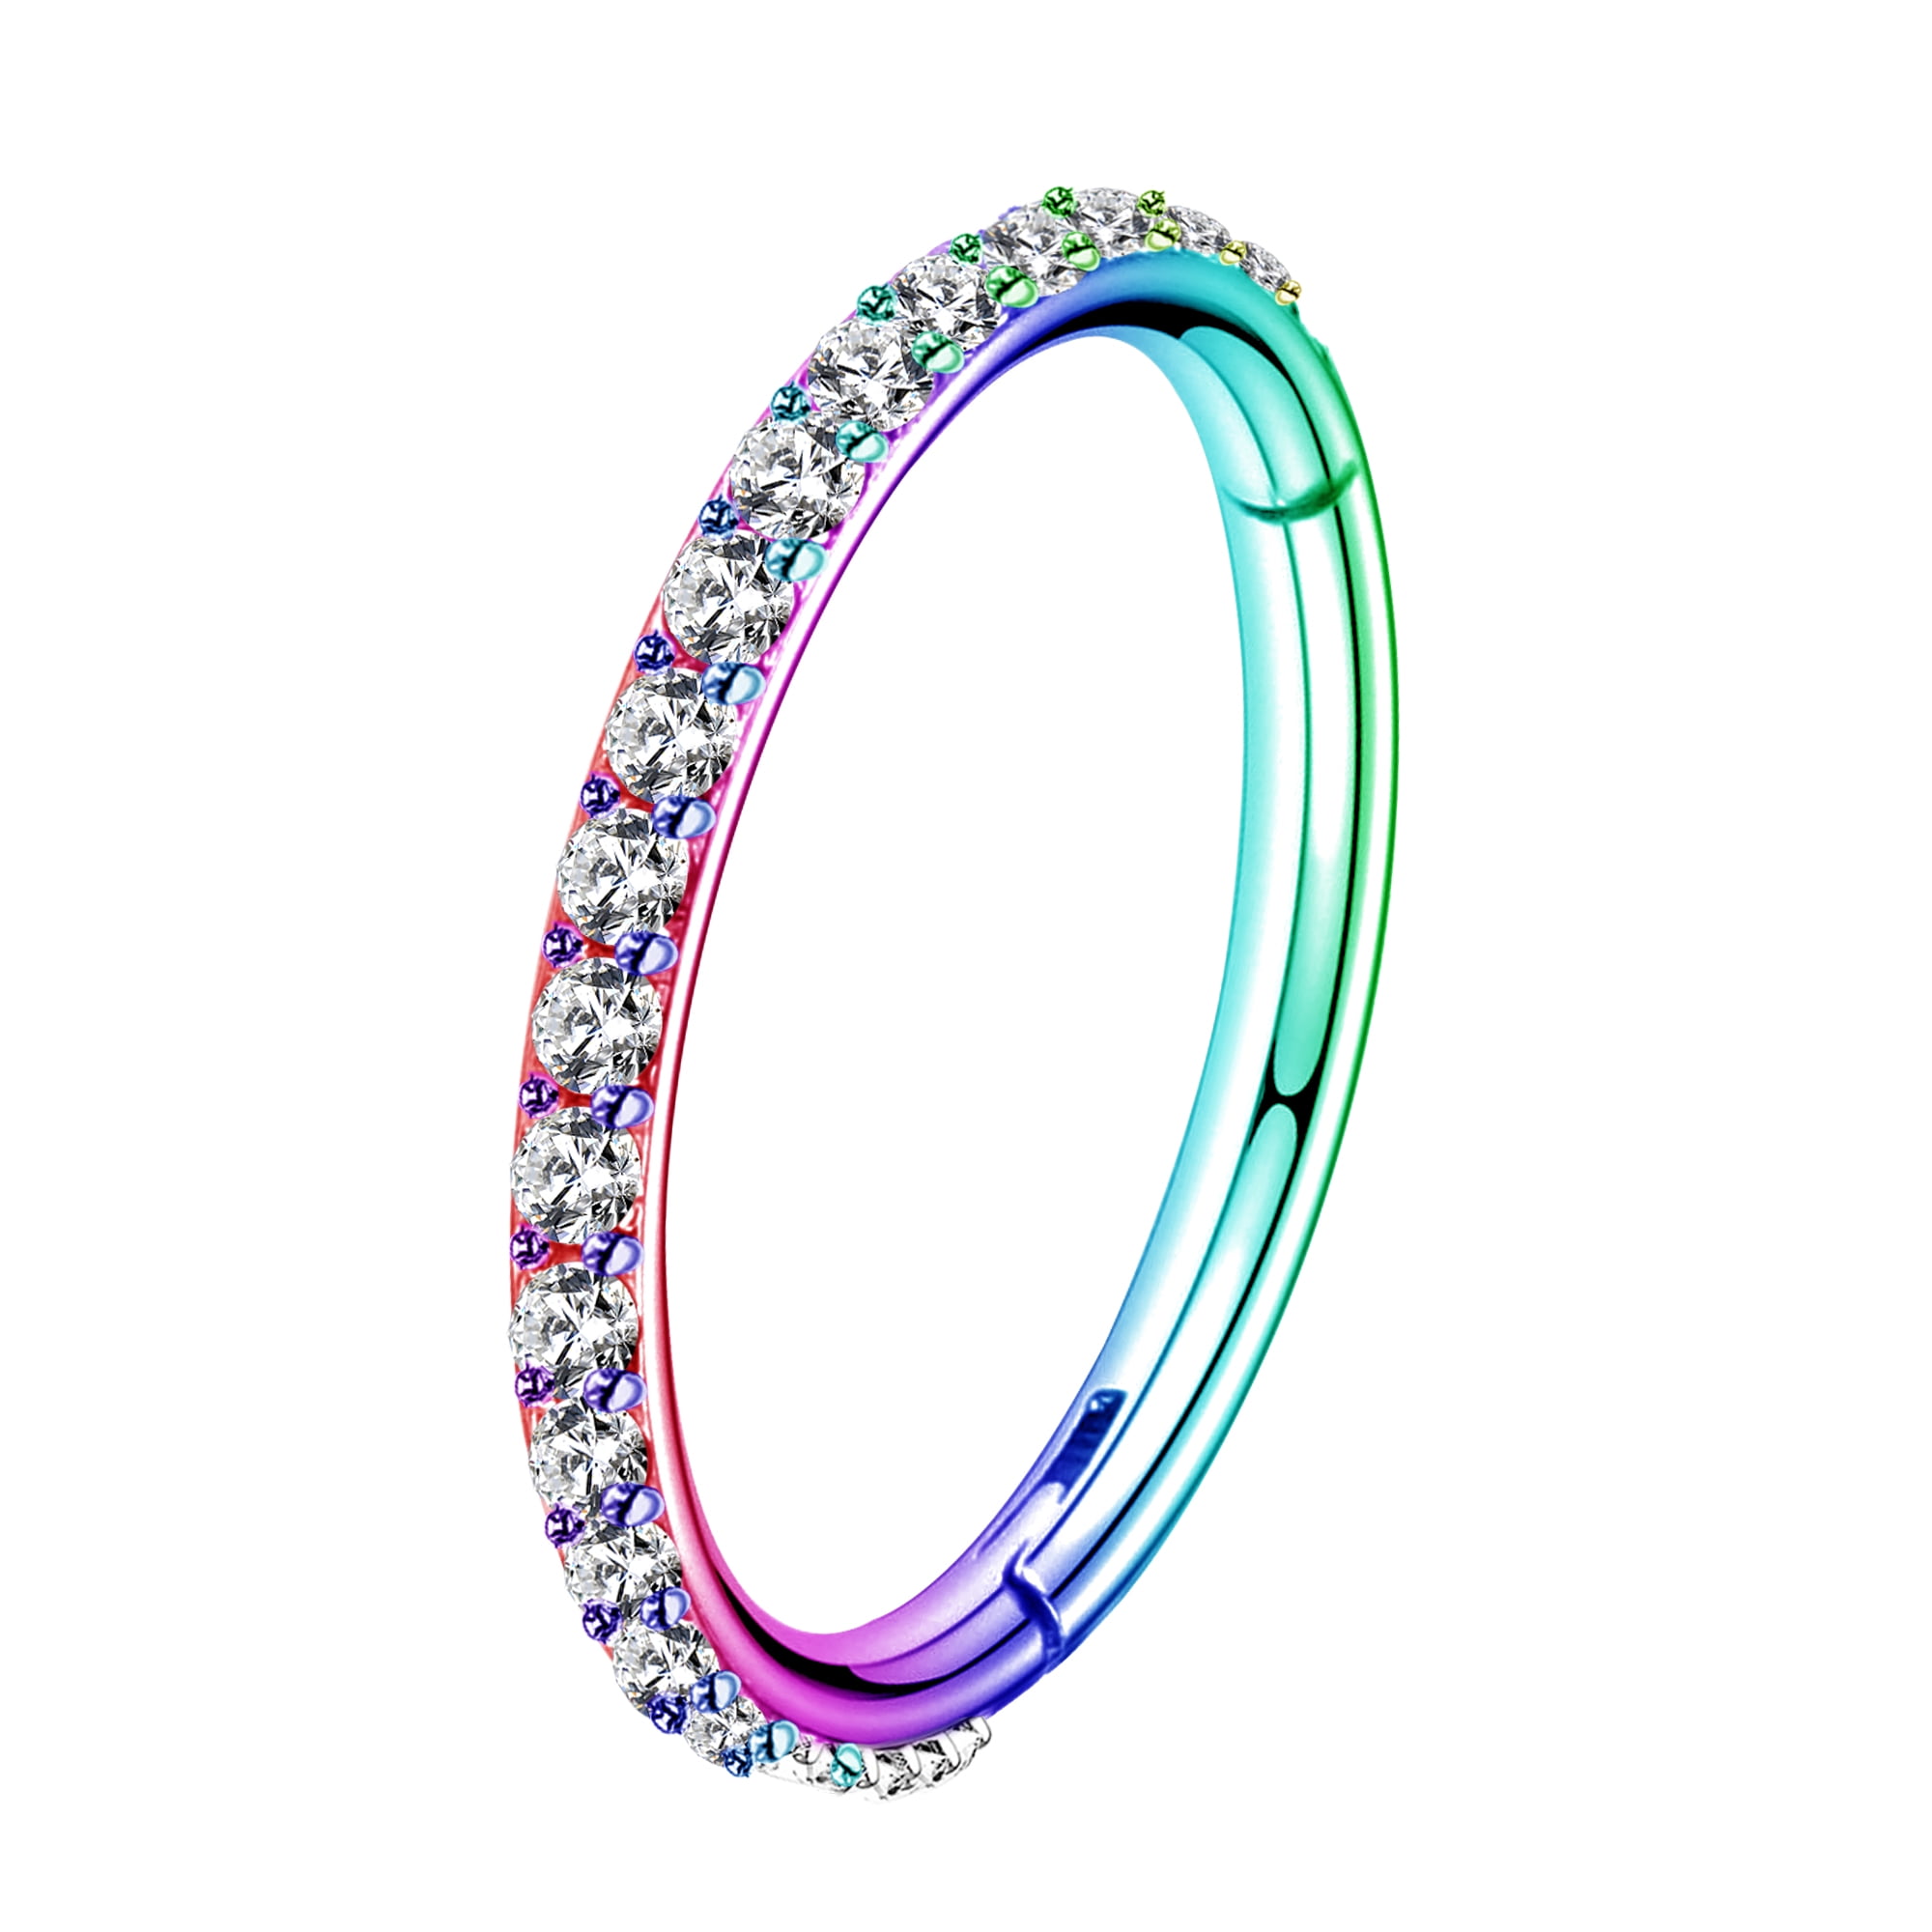 Hinged Segment Ring Septum Clicker Cartilage Ear Hoop Ring with CZ Gem Edge 